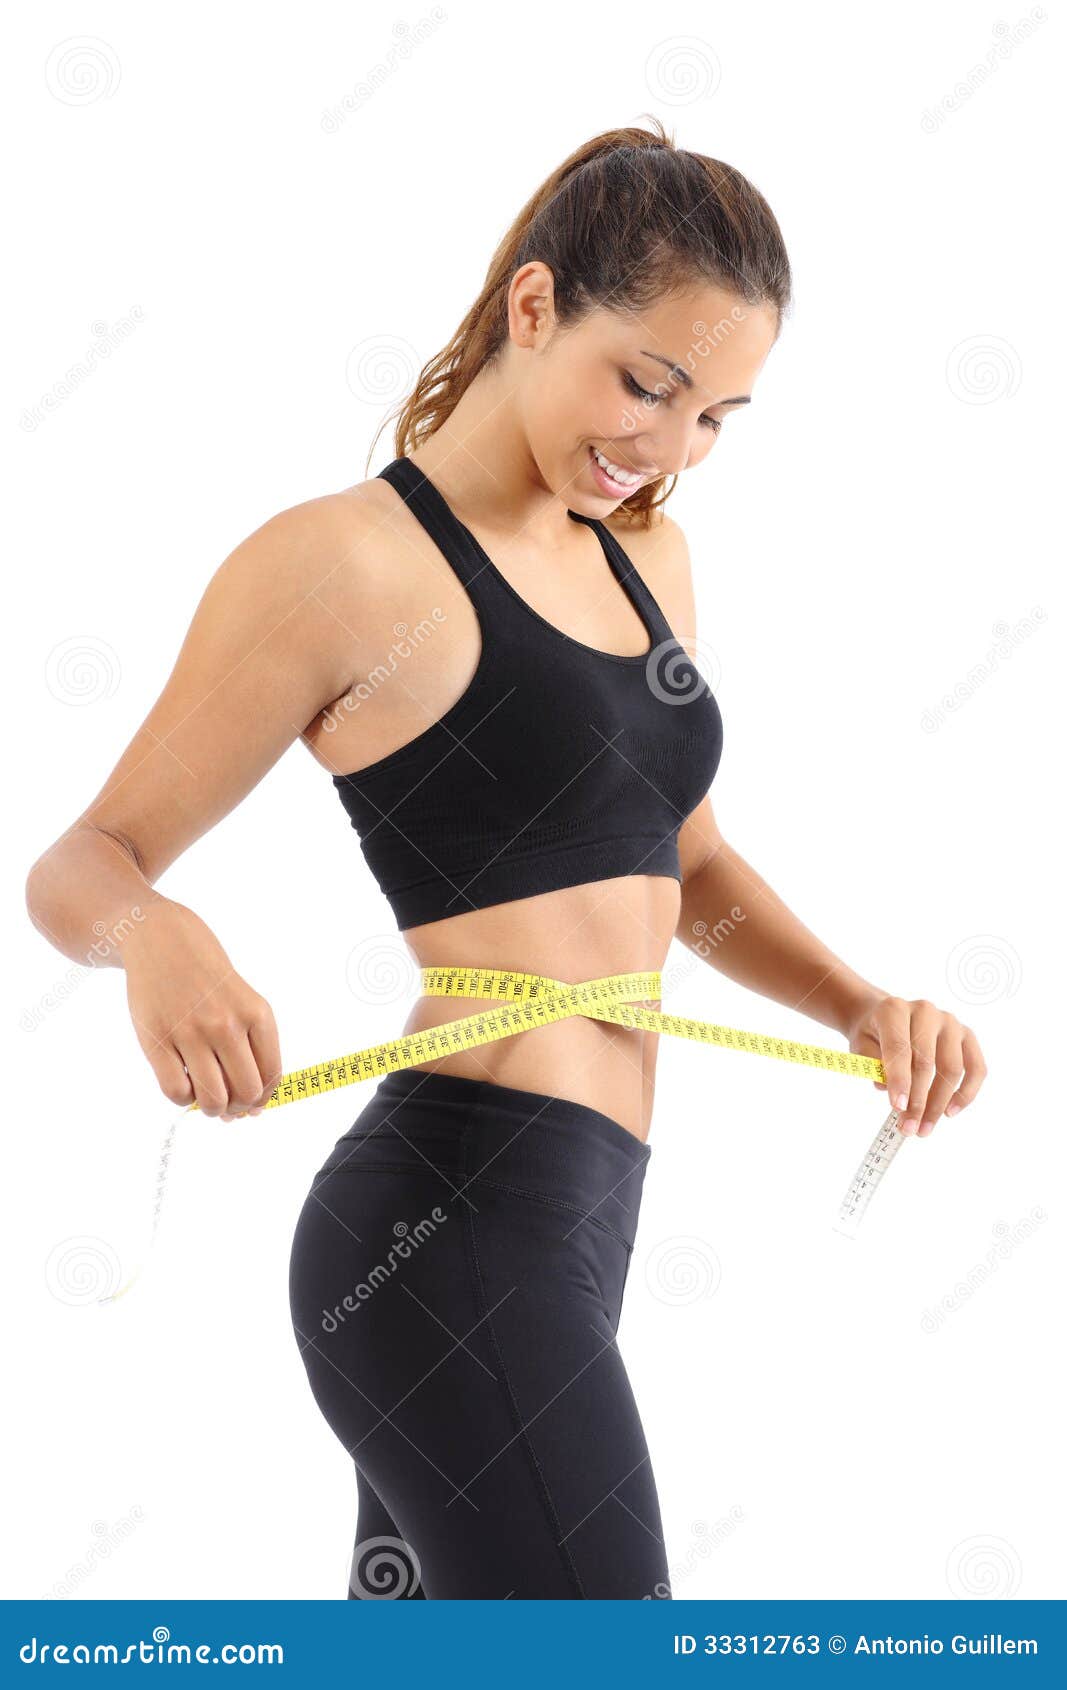 sportswoman measuring her waist with a measure tape